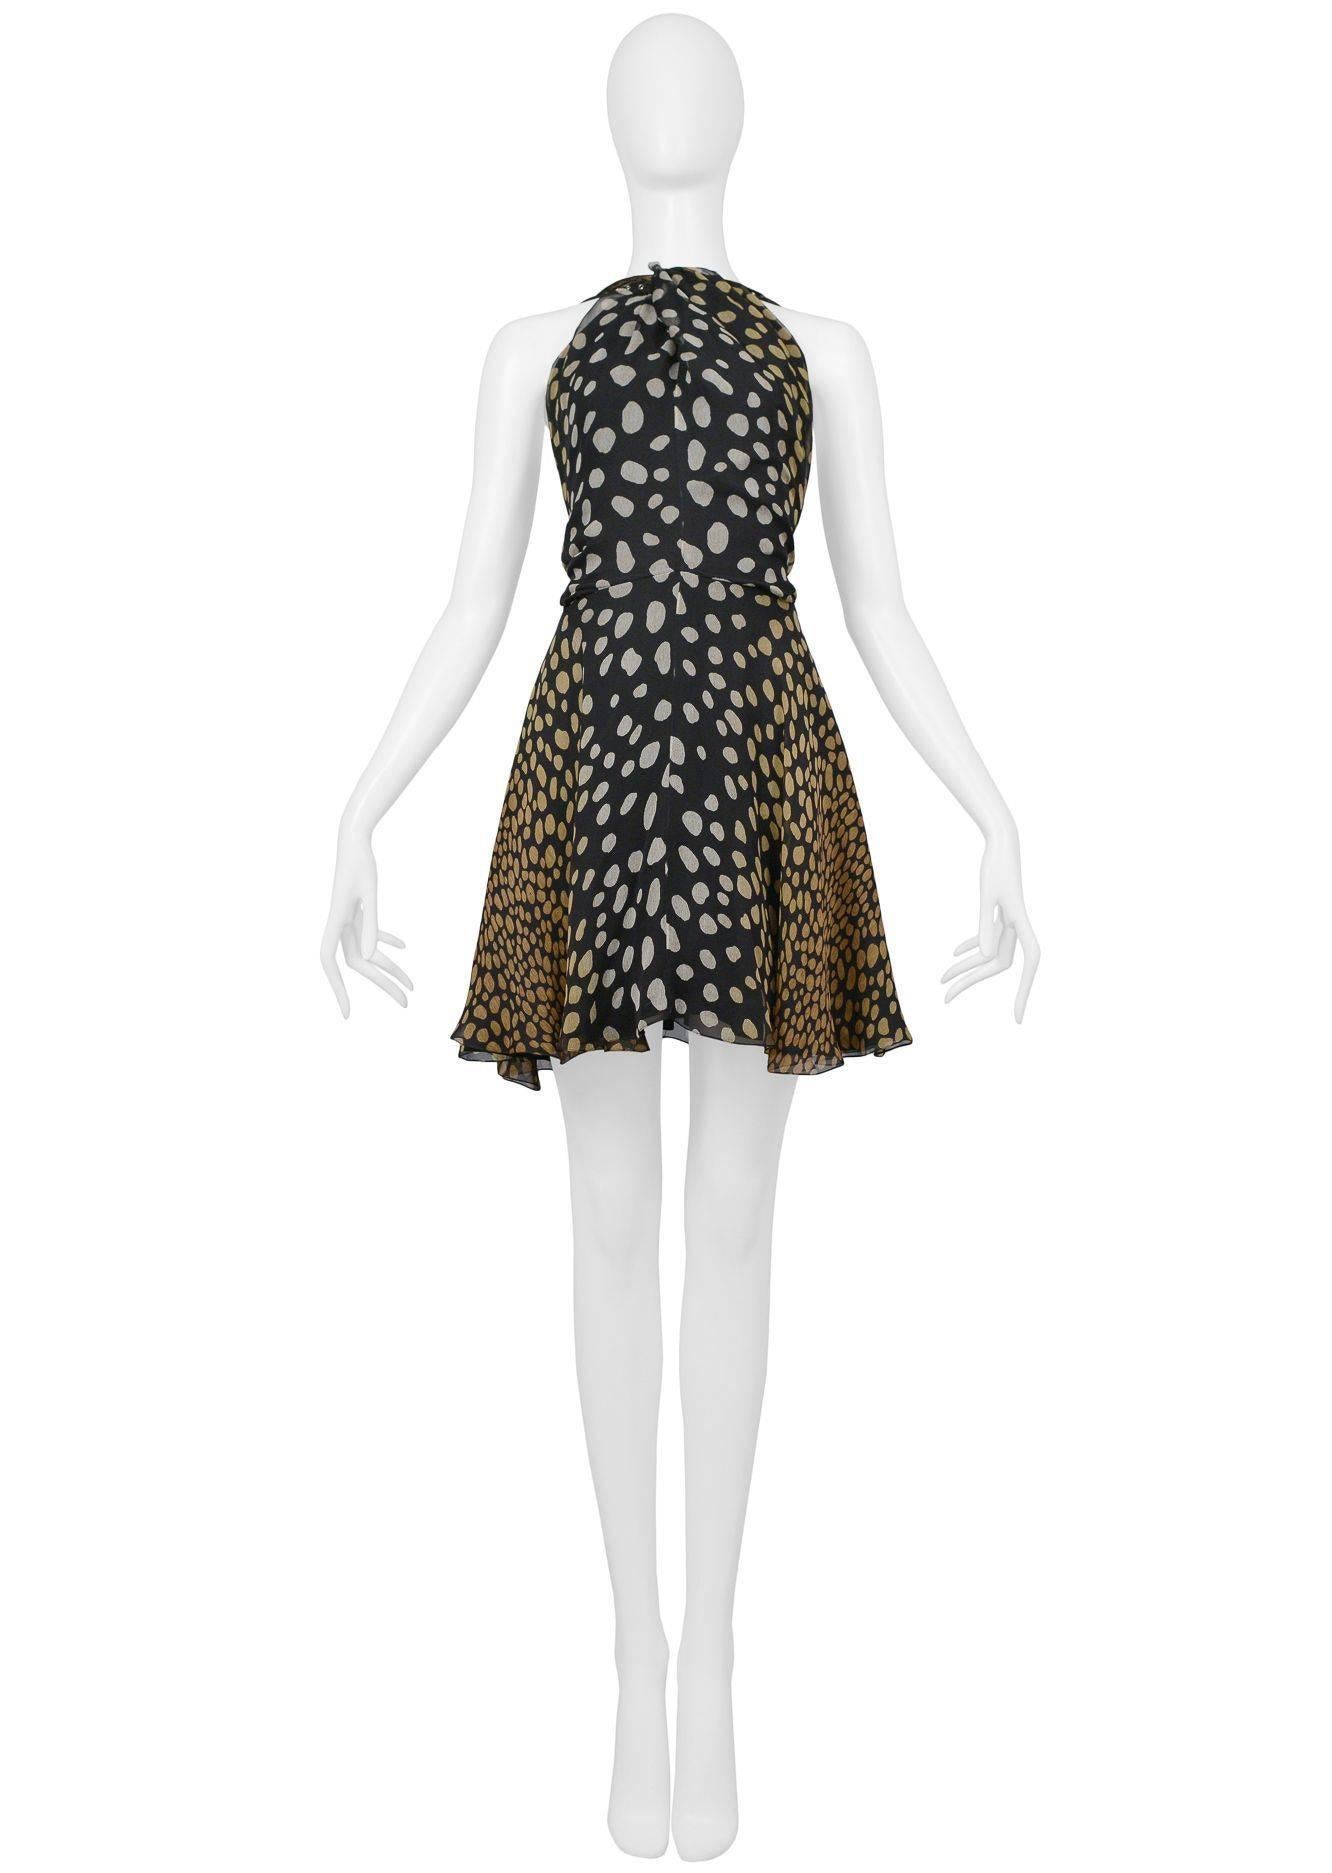 Christian Dior by John Galliano black and beige silk speckle print halter dress with black harness straps with grommets and silver tone buckles. Dress was featured on the runway and in advertising. Collection SS 2009.